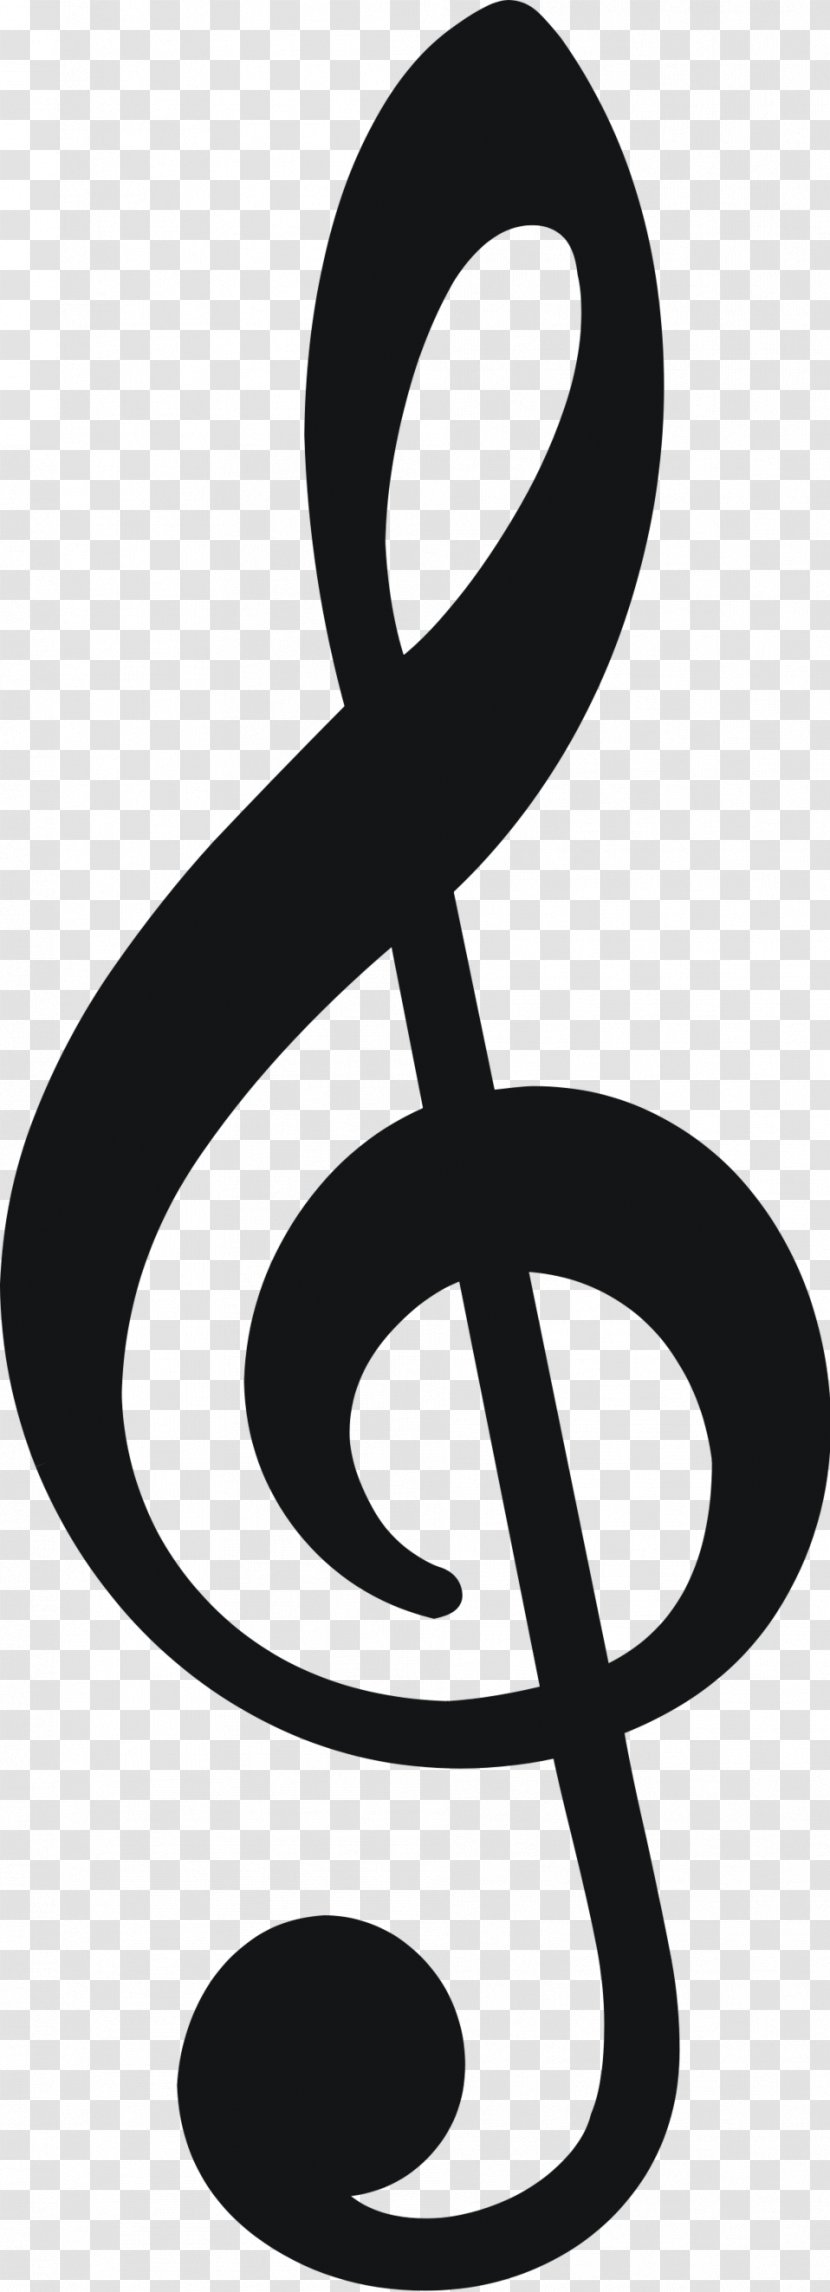 Musical Note Clef Melody Clip Art - Cartoon - G Transparent PNG